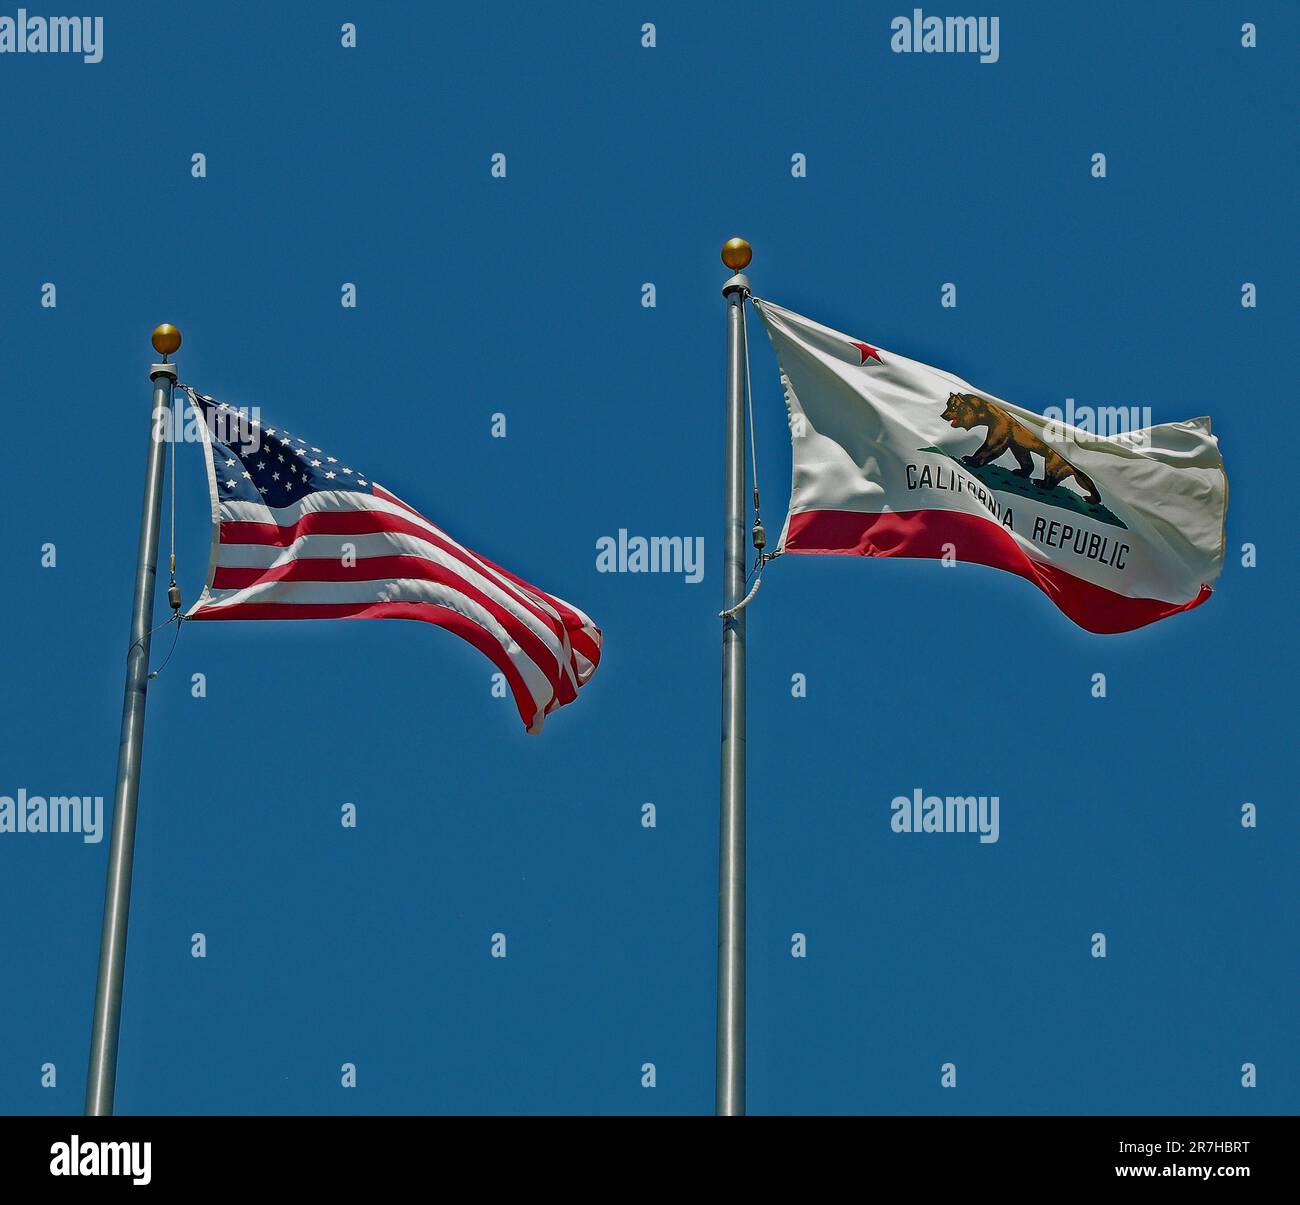 American stars and stripes flag and California Republic grizzly Bear state flag in Dublin, California Stock Photo